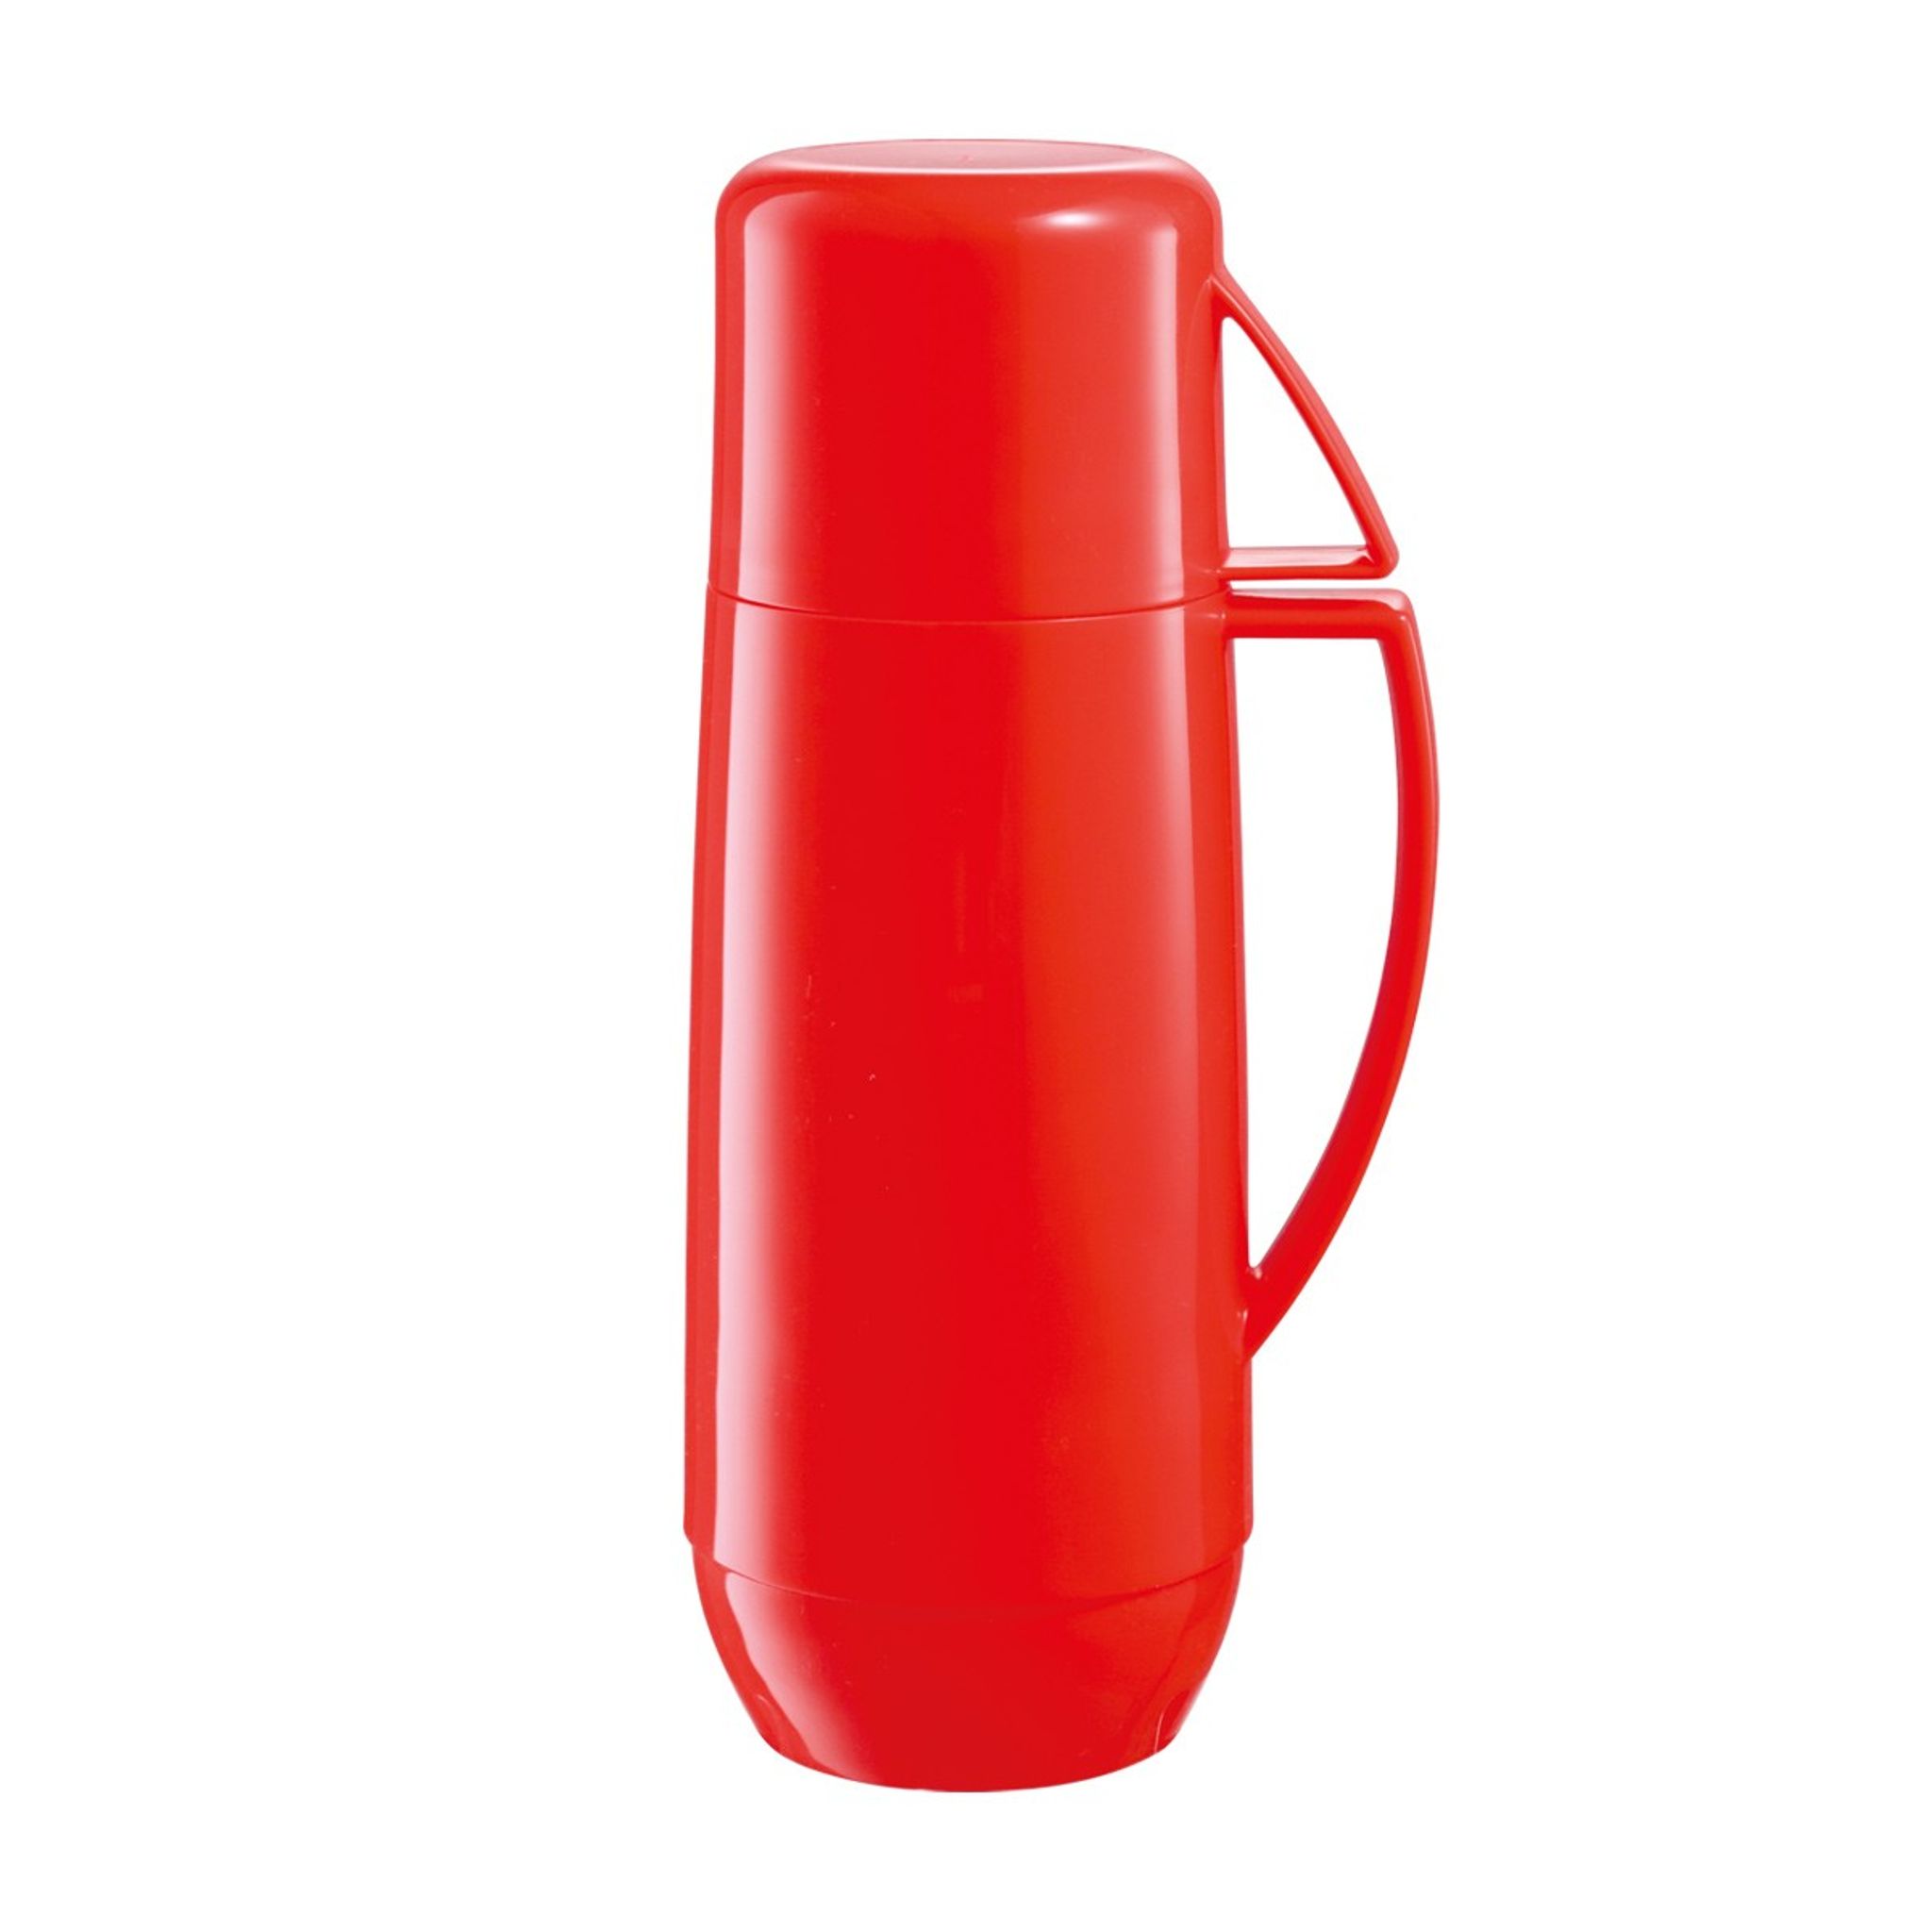 Vacuum flask with cup FAMILY COLORI 1.0 l, red